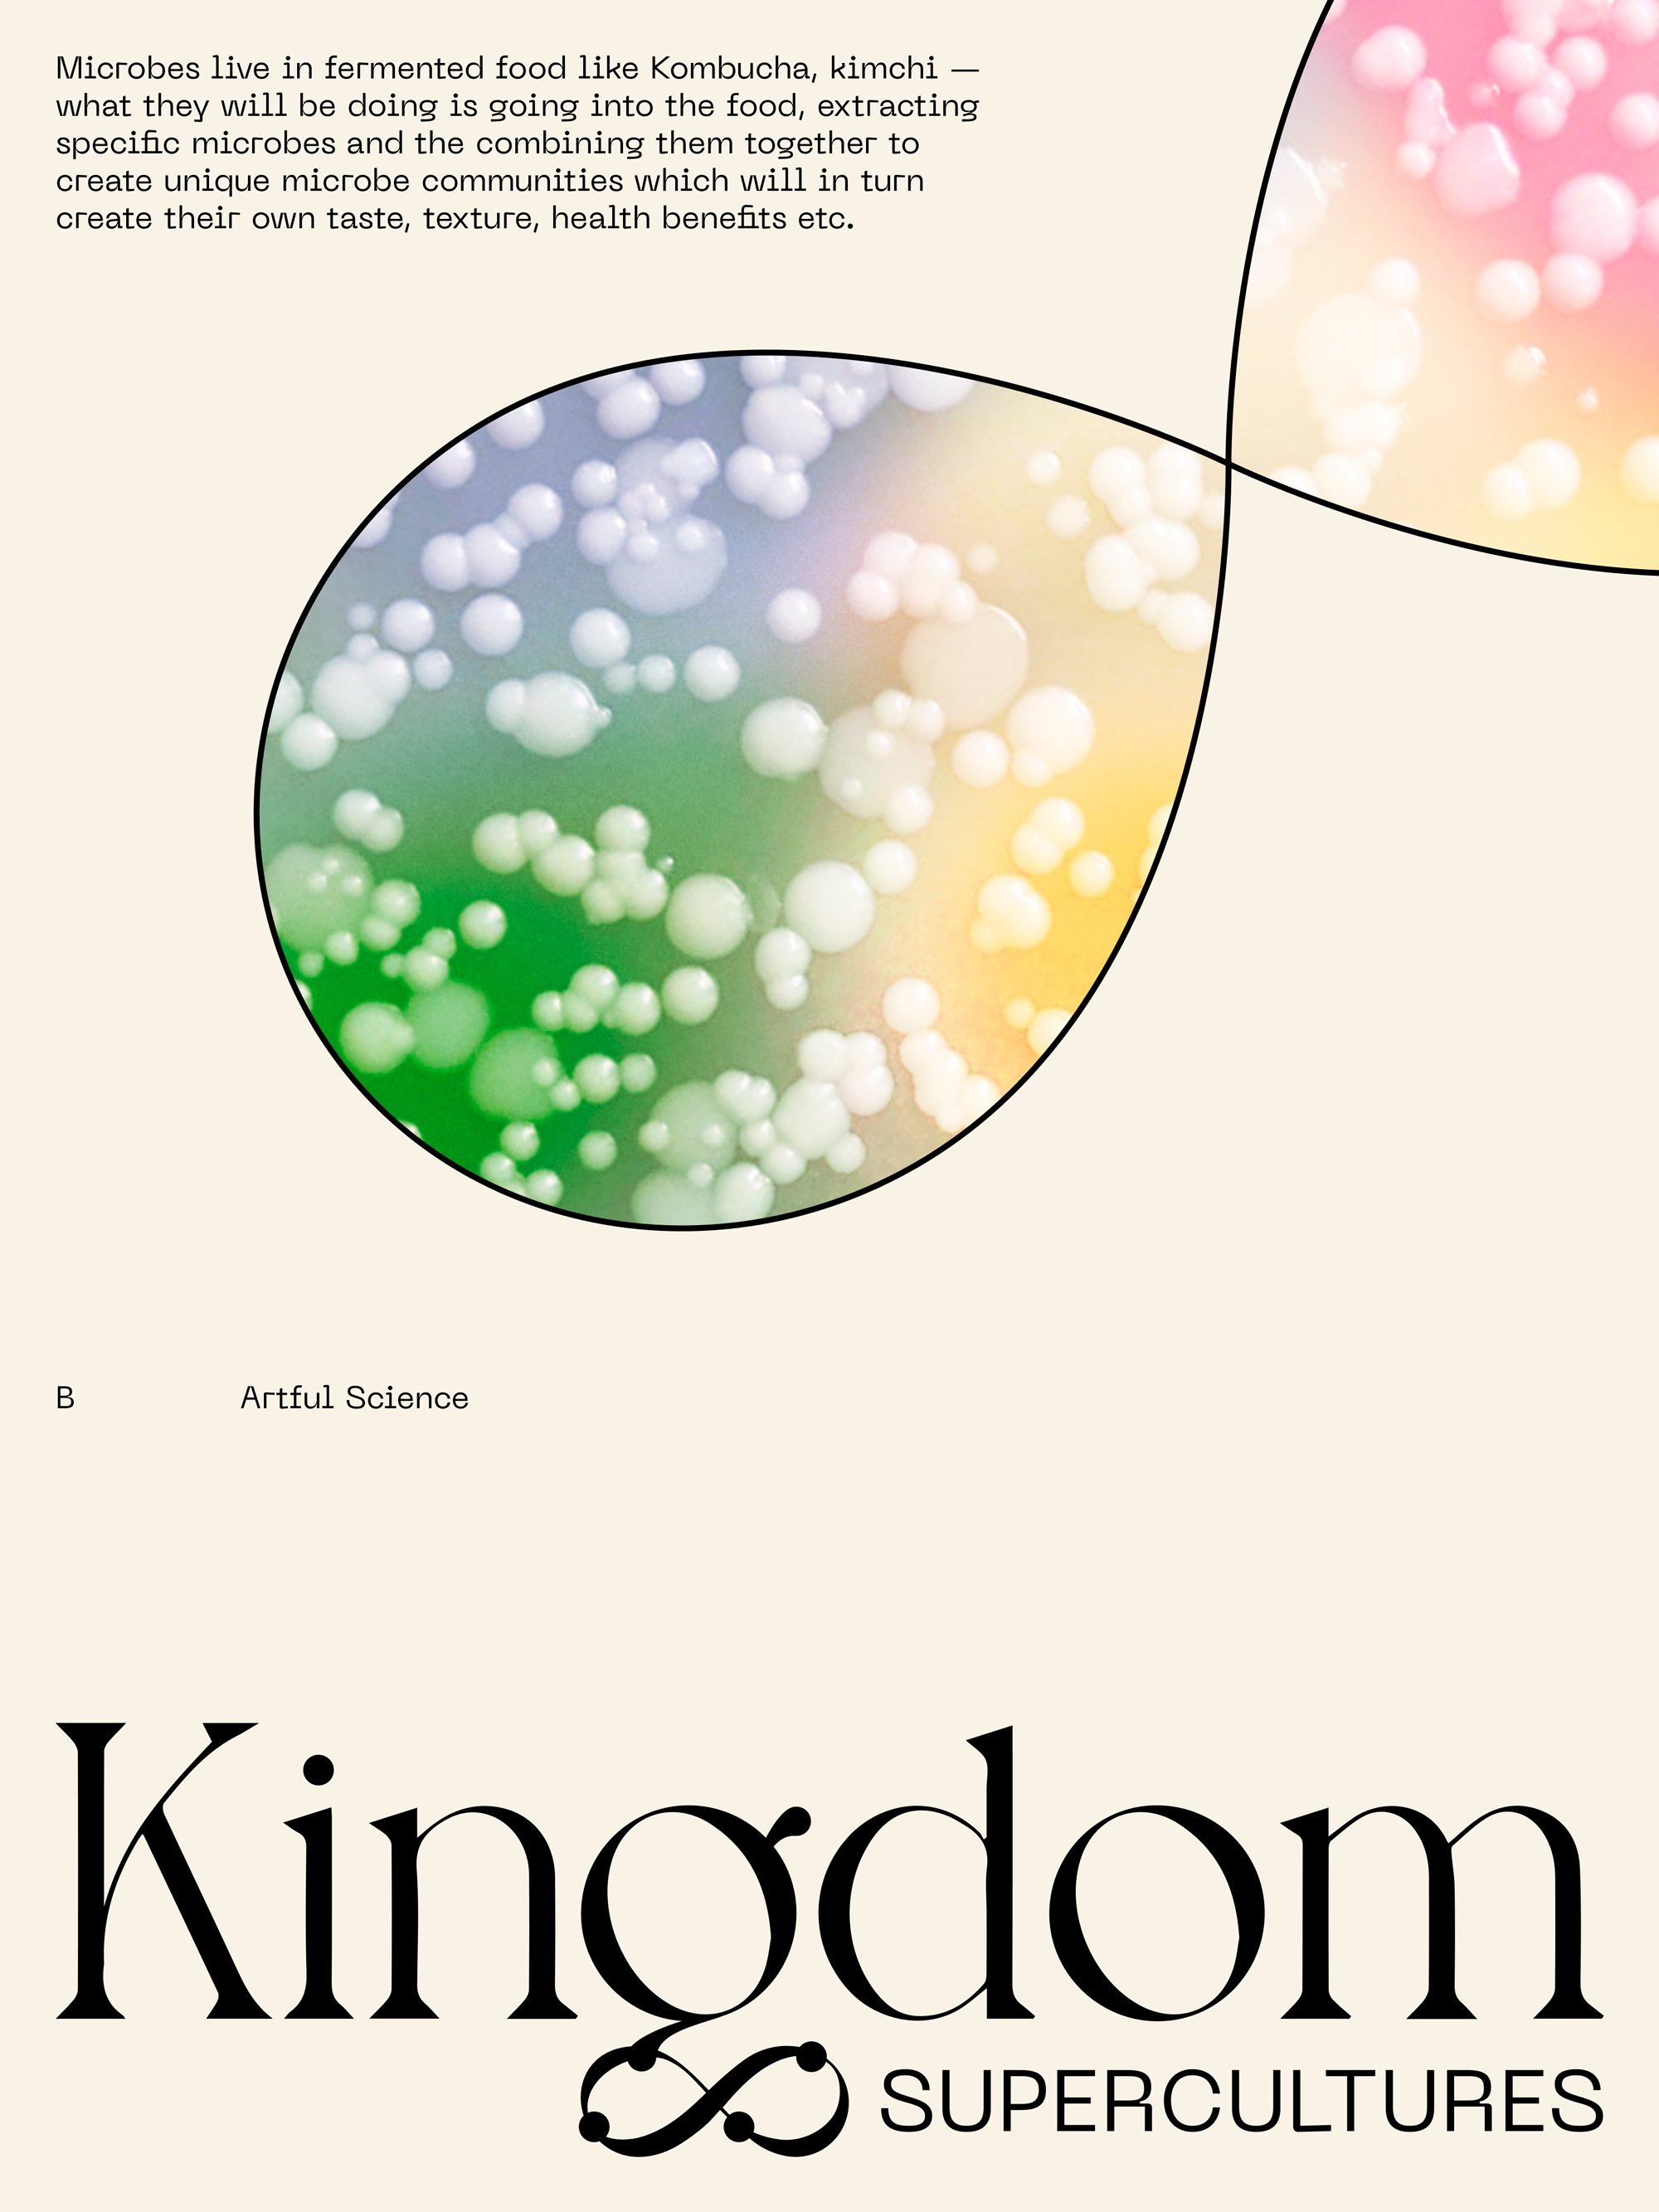 Kingdom Supercultures beige poster with custom infinity sign graphics, designed by RoAndCo